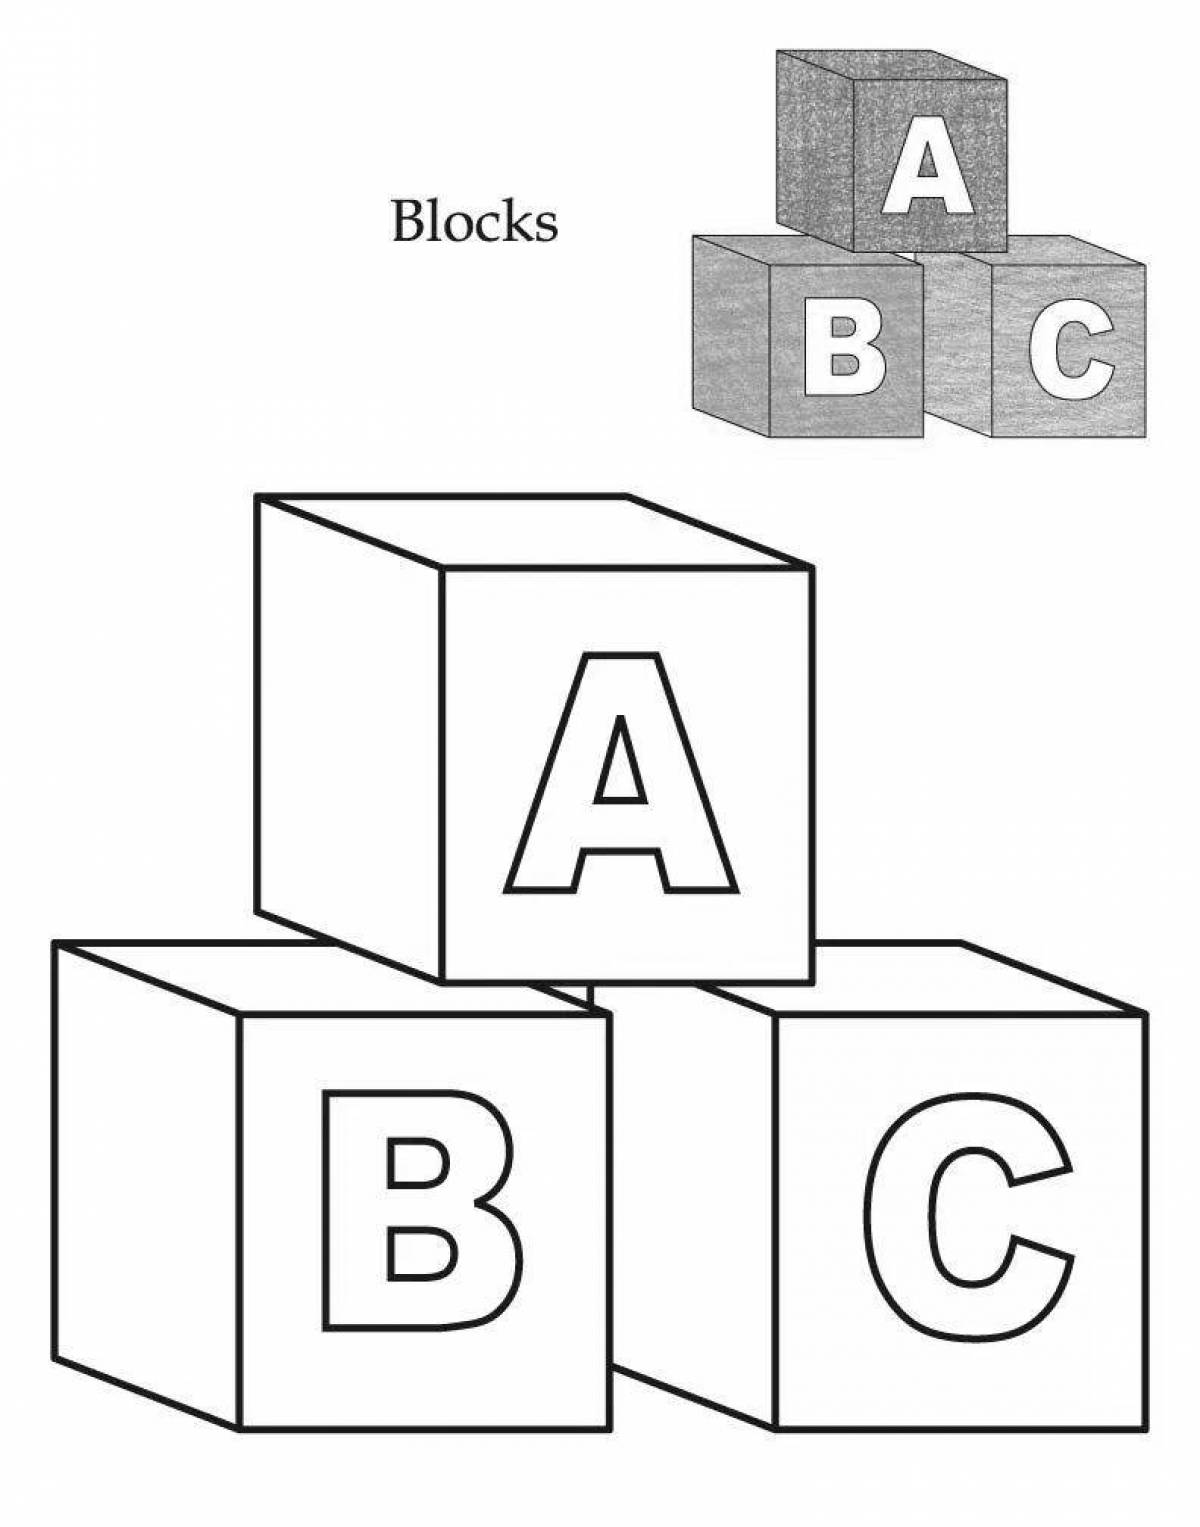 Blocks with colored splashes coloring book for children